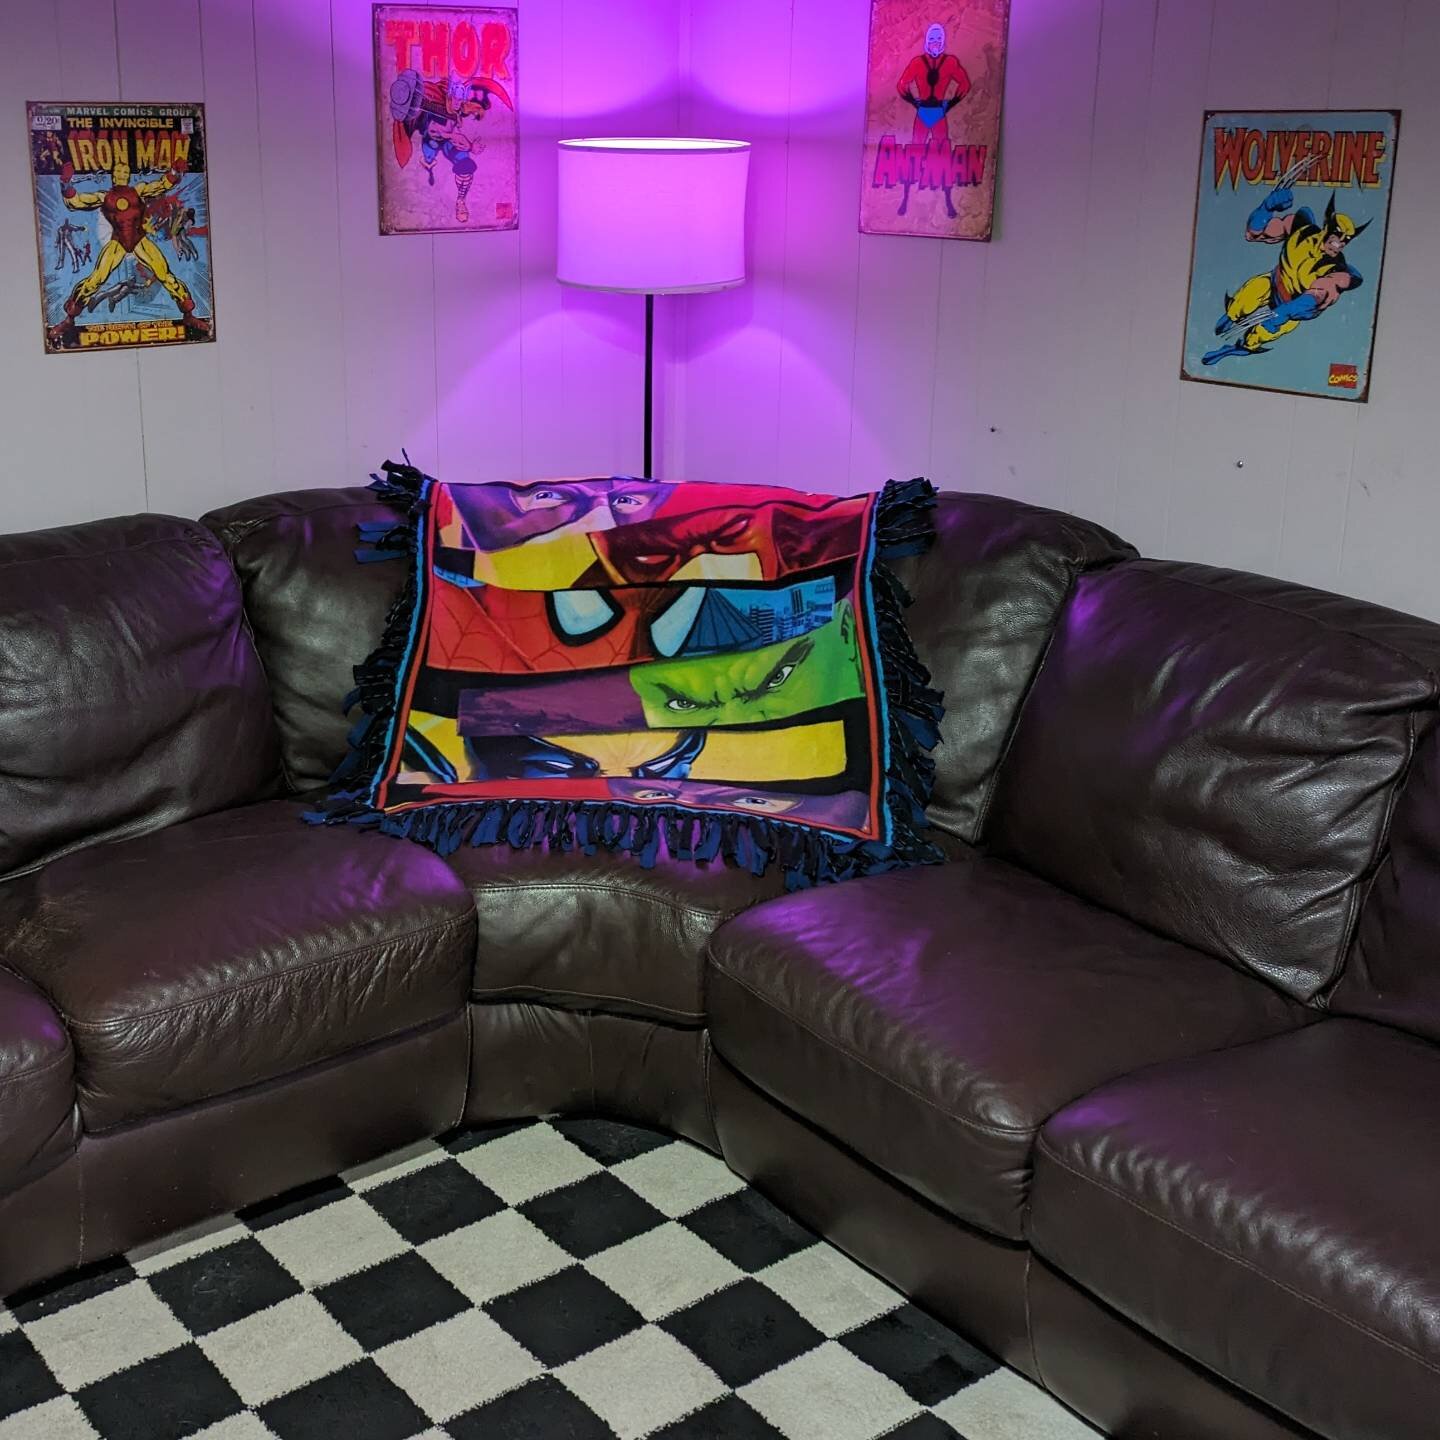 We are behind on editing, but have had a cool little change in scenery. Do you have a nerd den or game room?